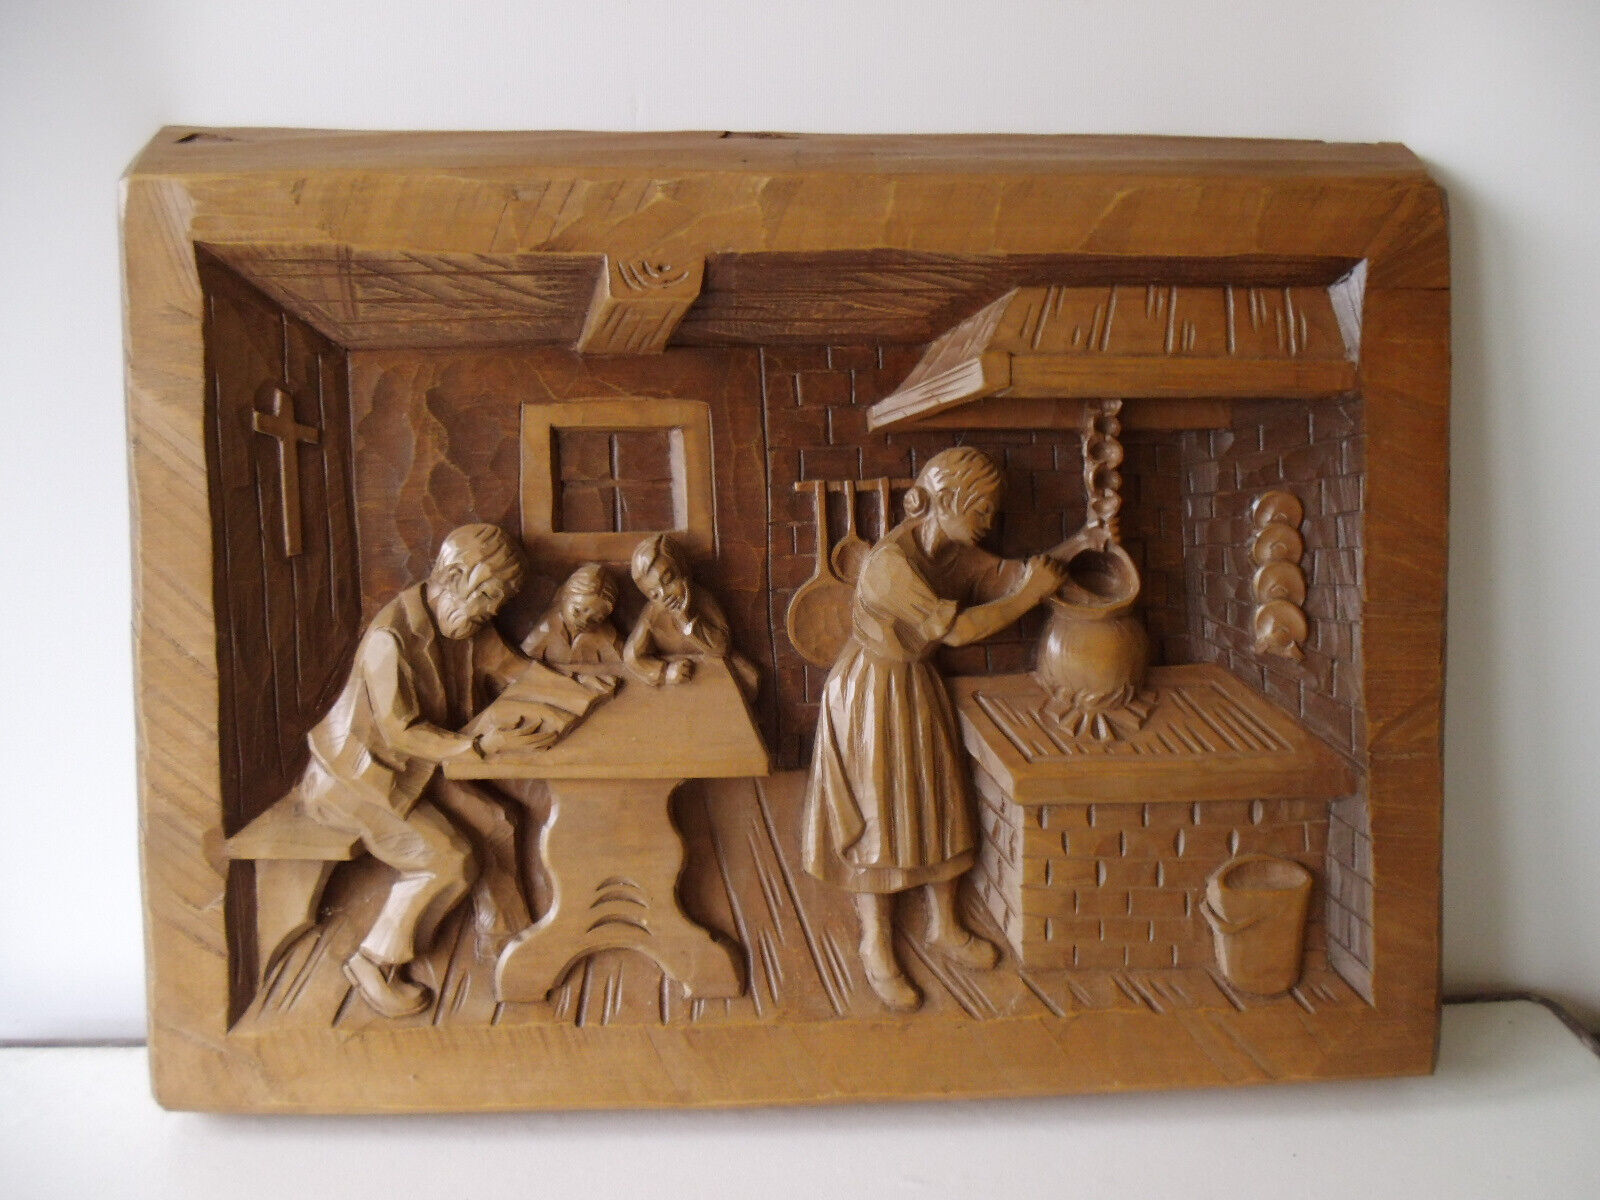 MASSIVE HEAVY WOODEN HAND CARVED 3D WALL RELIEF FARM FAMILY IN THE KITCHEN